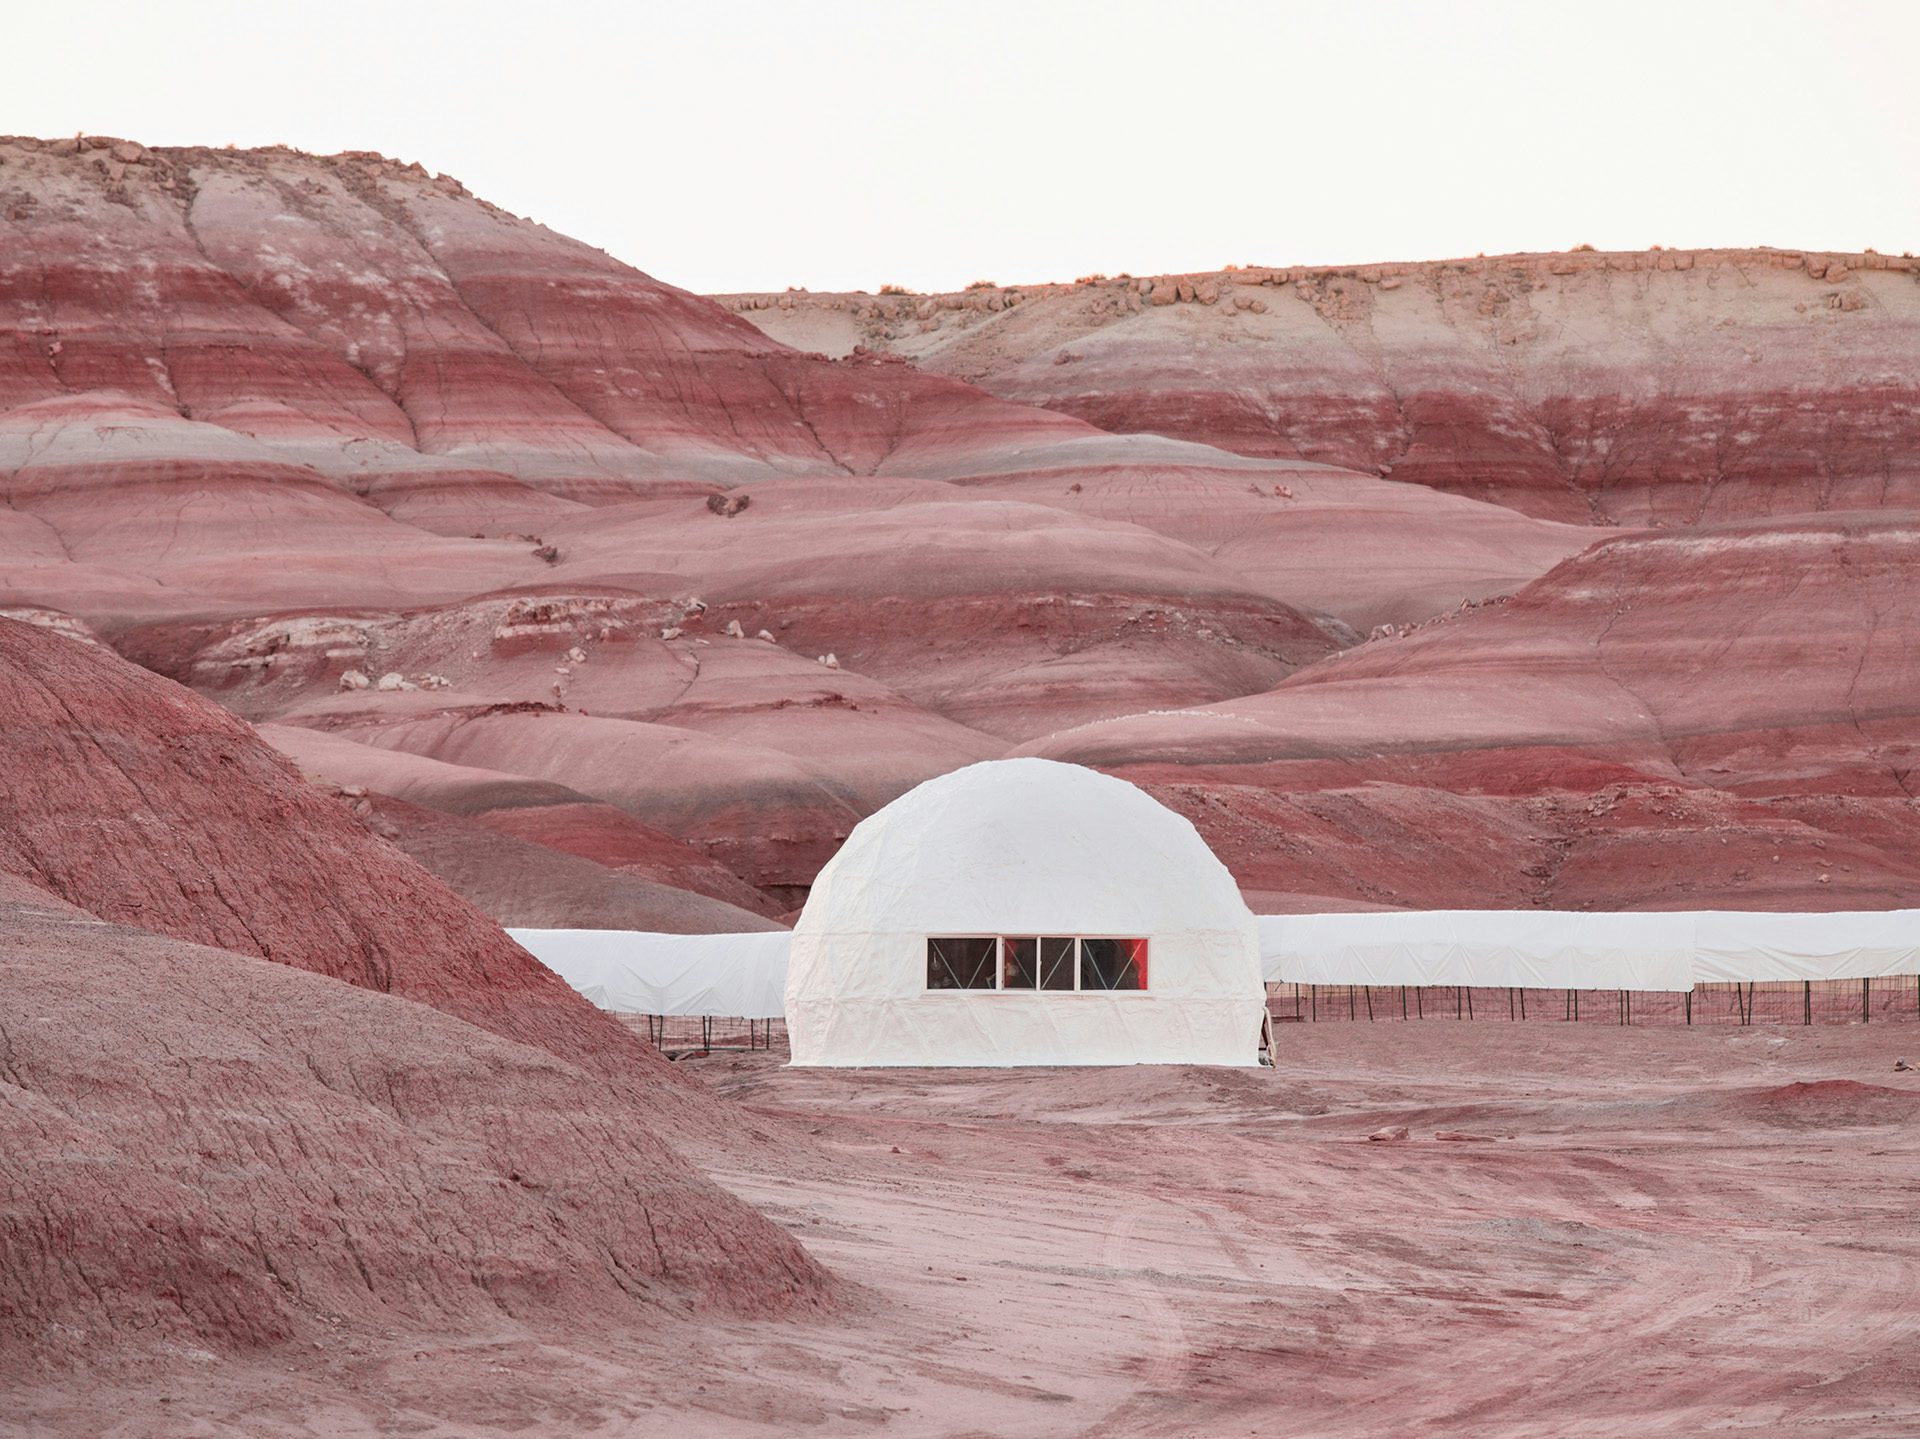 Image from American Glitch by Andrea Orejarena and Caleb Stein showing a Mars simulation, featuring a white semi circular building surrounded by dusty red-brown hills